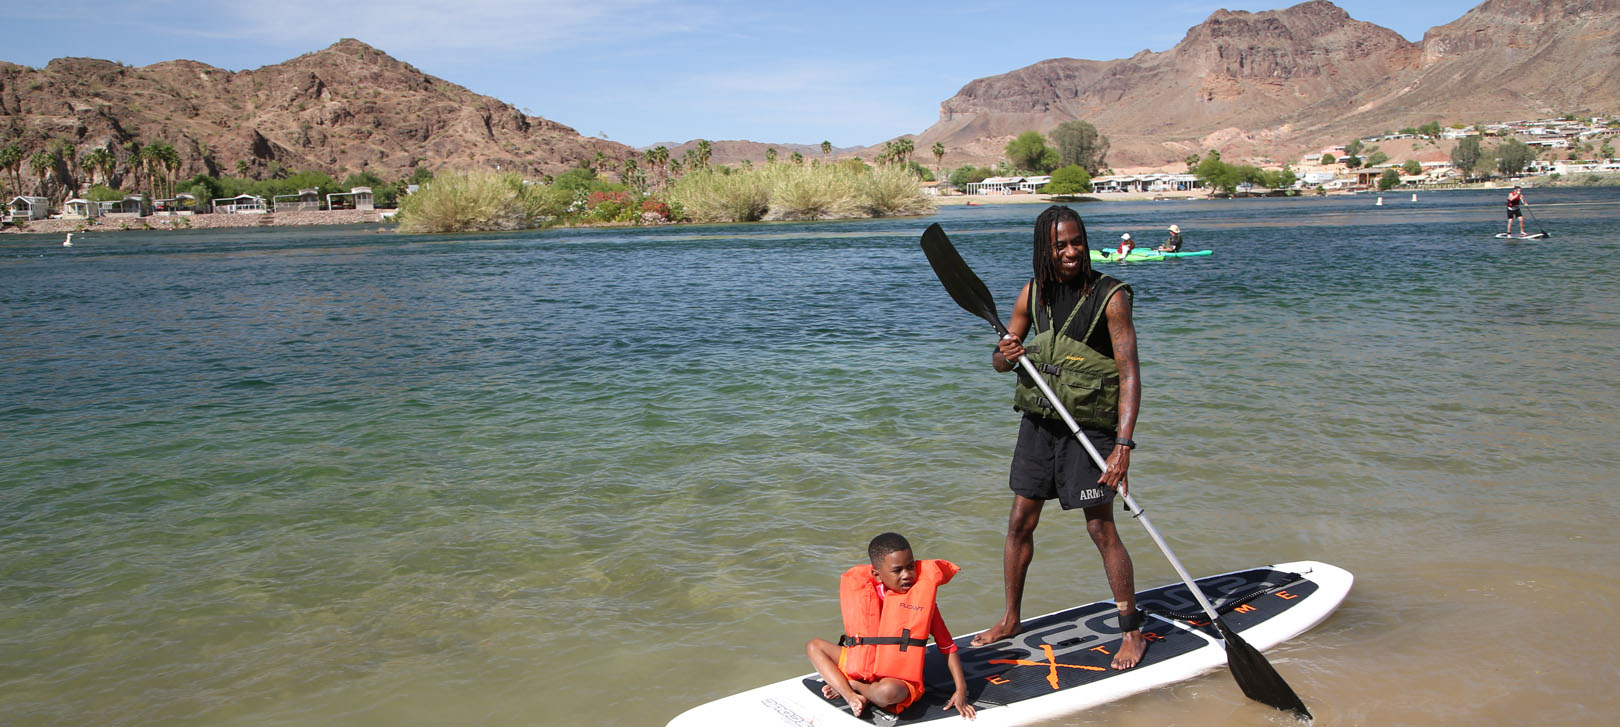 A man standing on a paddleboard with a child in a lifejacket sitting in front of him on the Colorado River